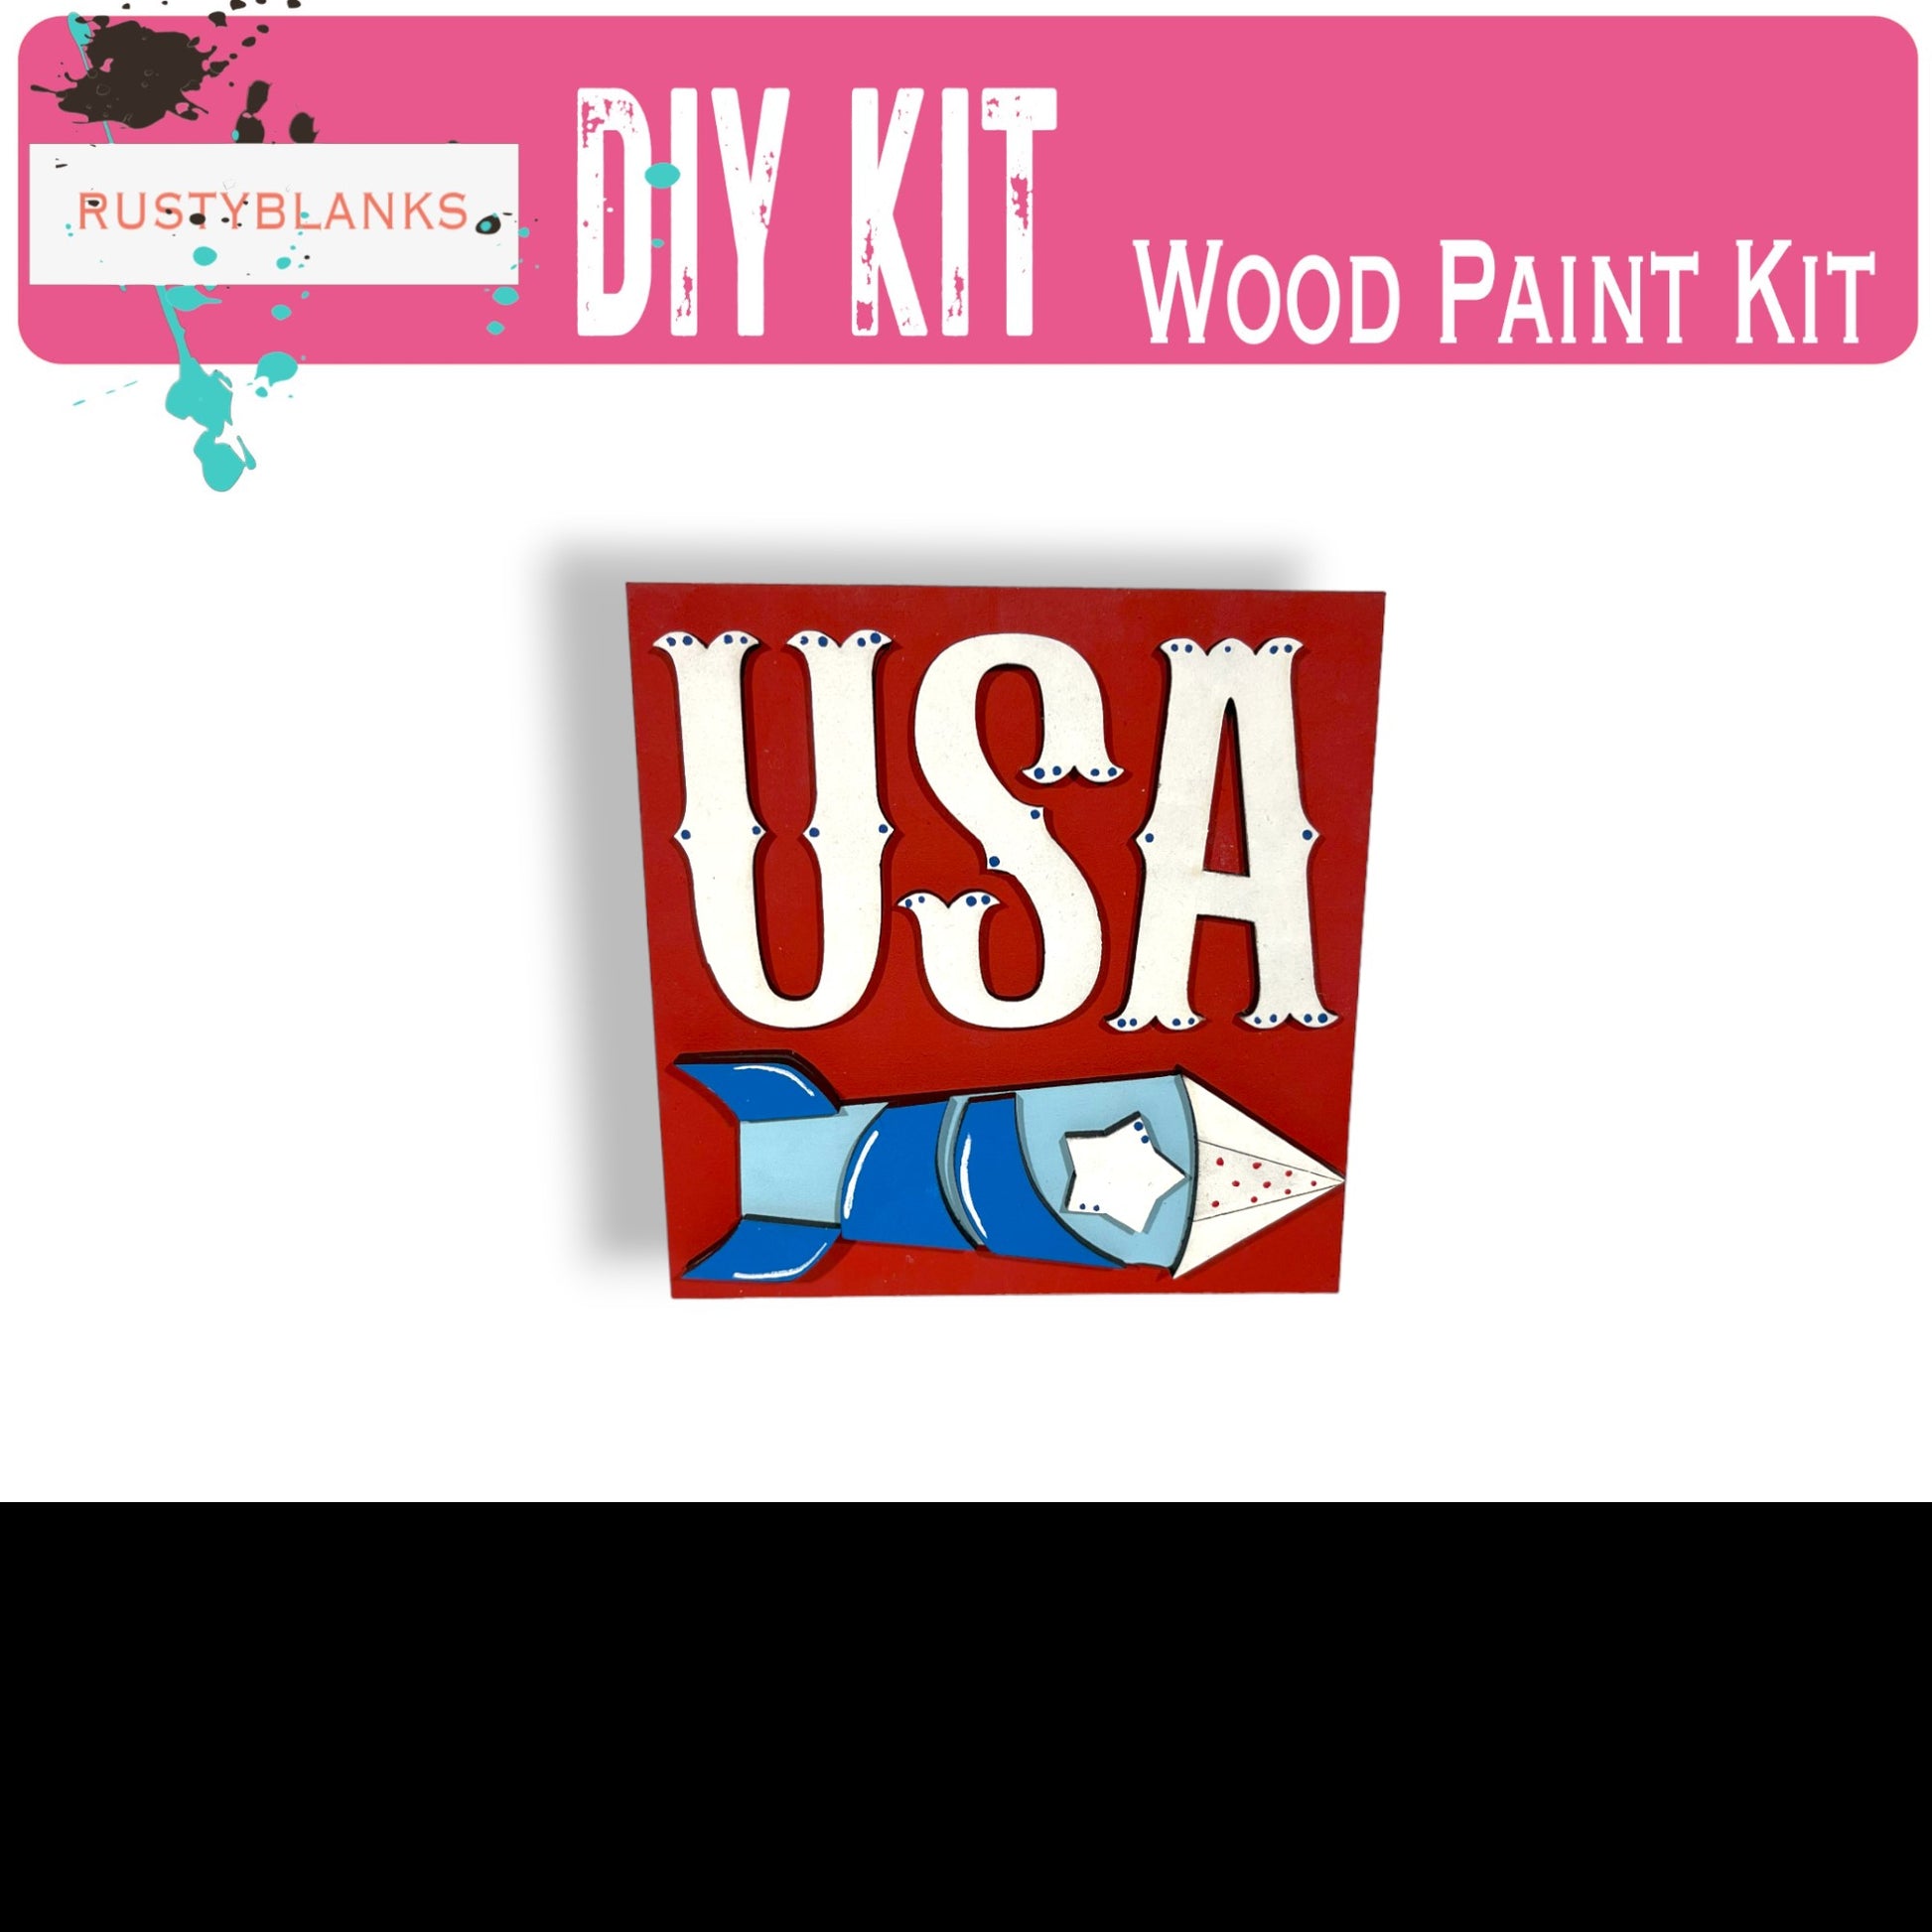 a picture of a wooden paint kit